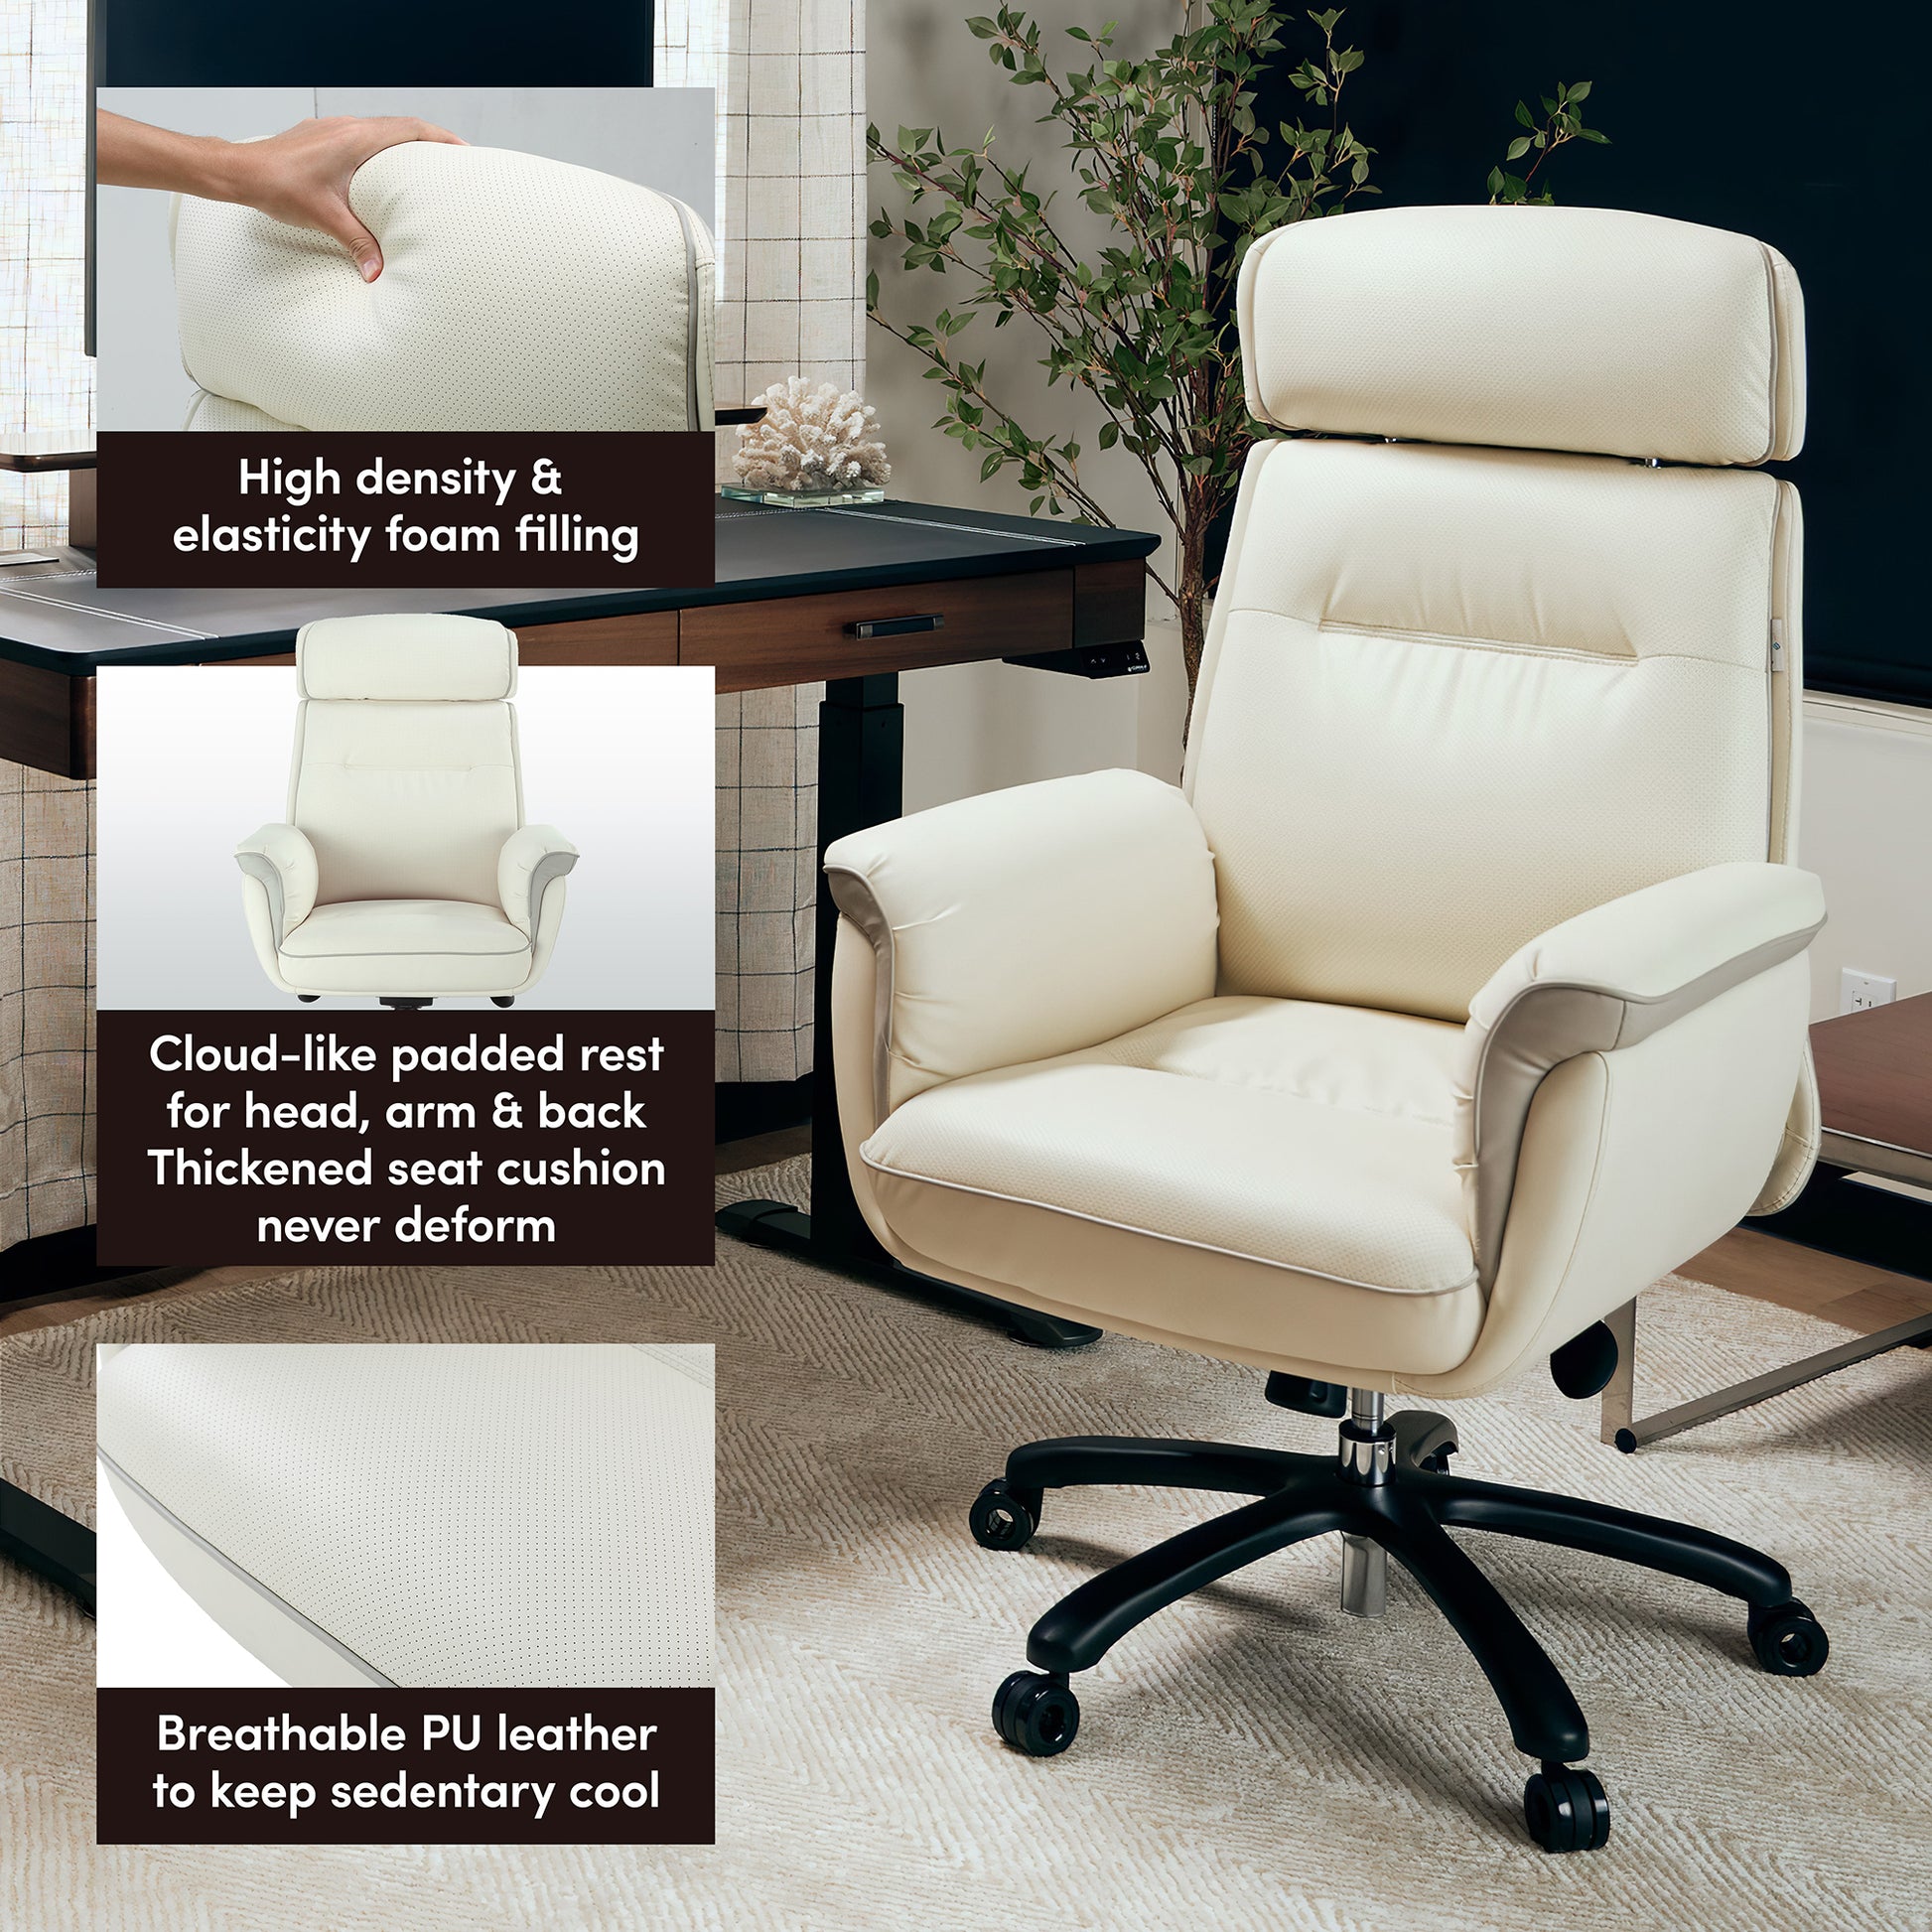 Eureka Royal, comfy leather executive office chair with high back and lumbar support, Beige White, Executive Office, High Density & Elasticity Foam Filling, Breathable PU Leather